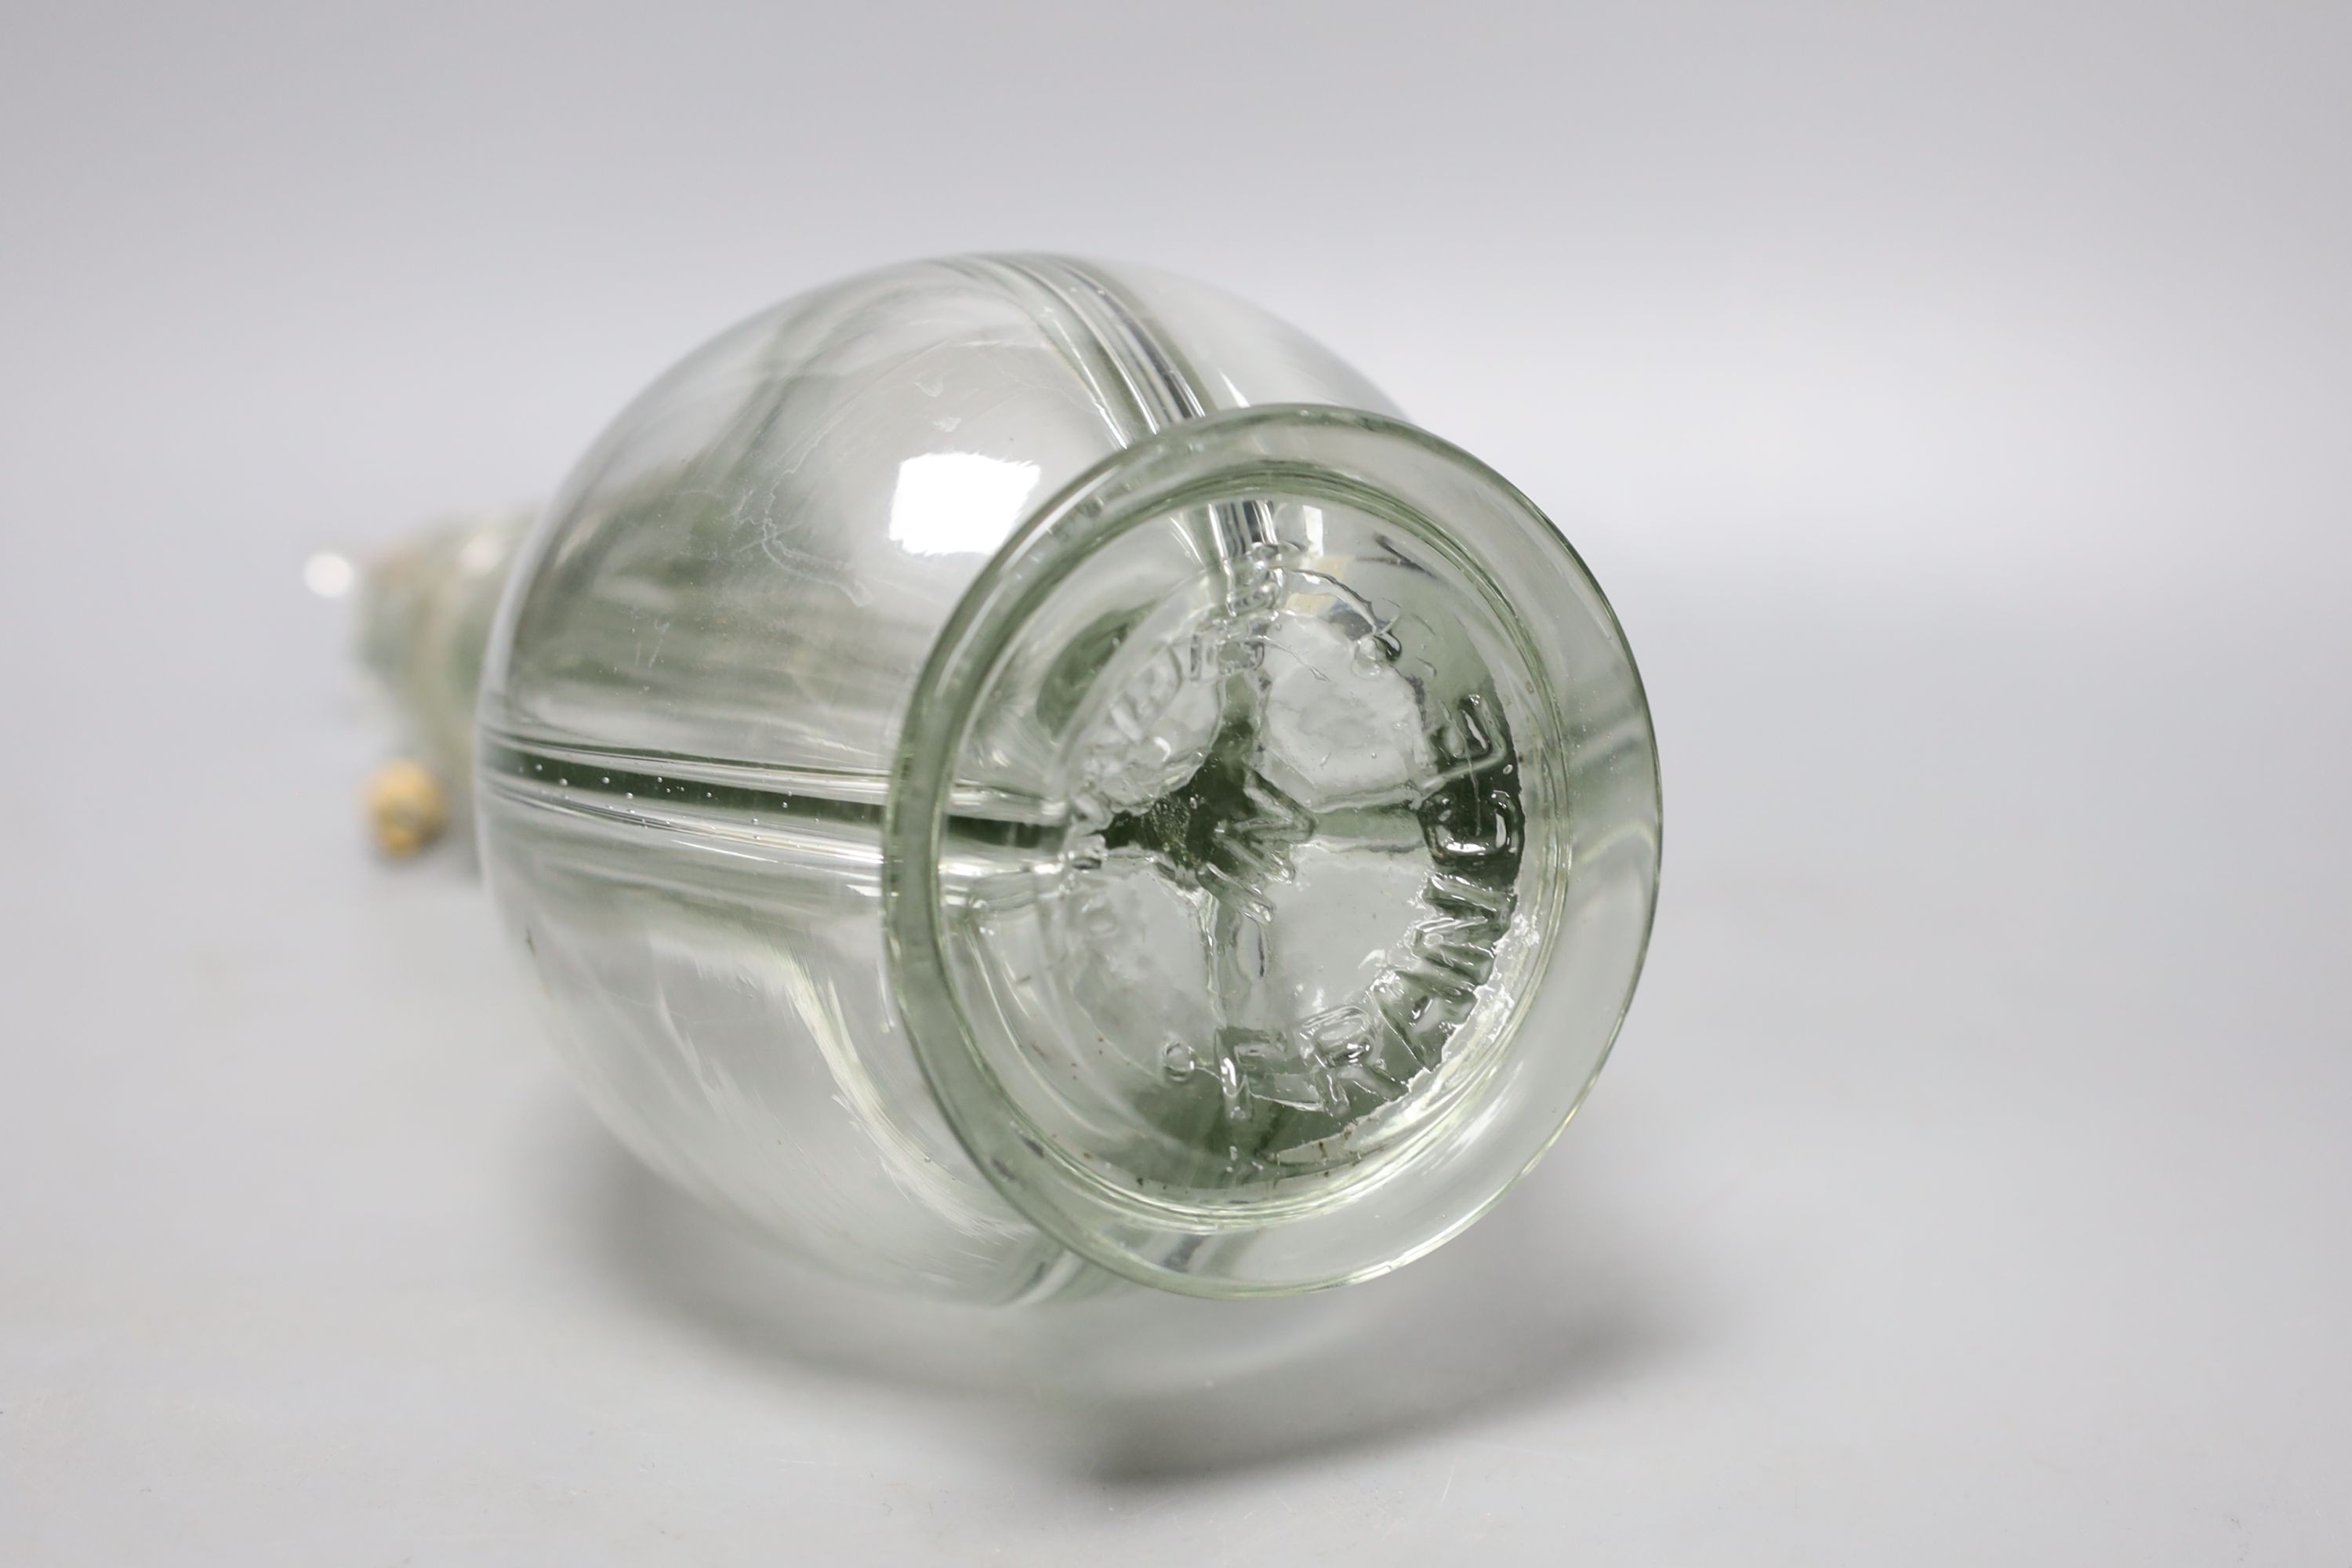 A French four division moulded glass oil and vinegar bottle, 32cm